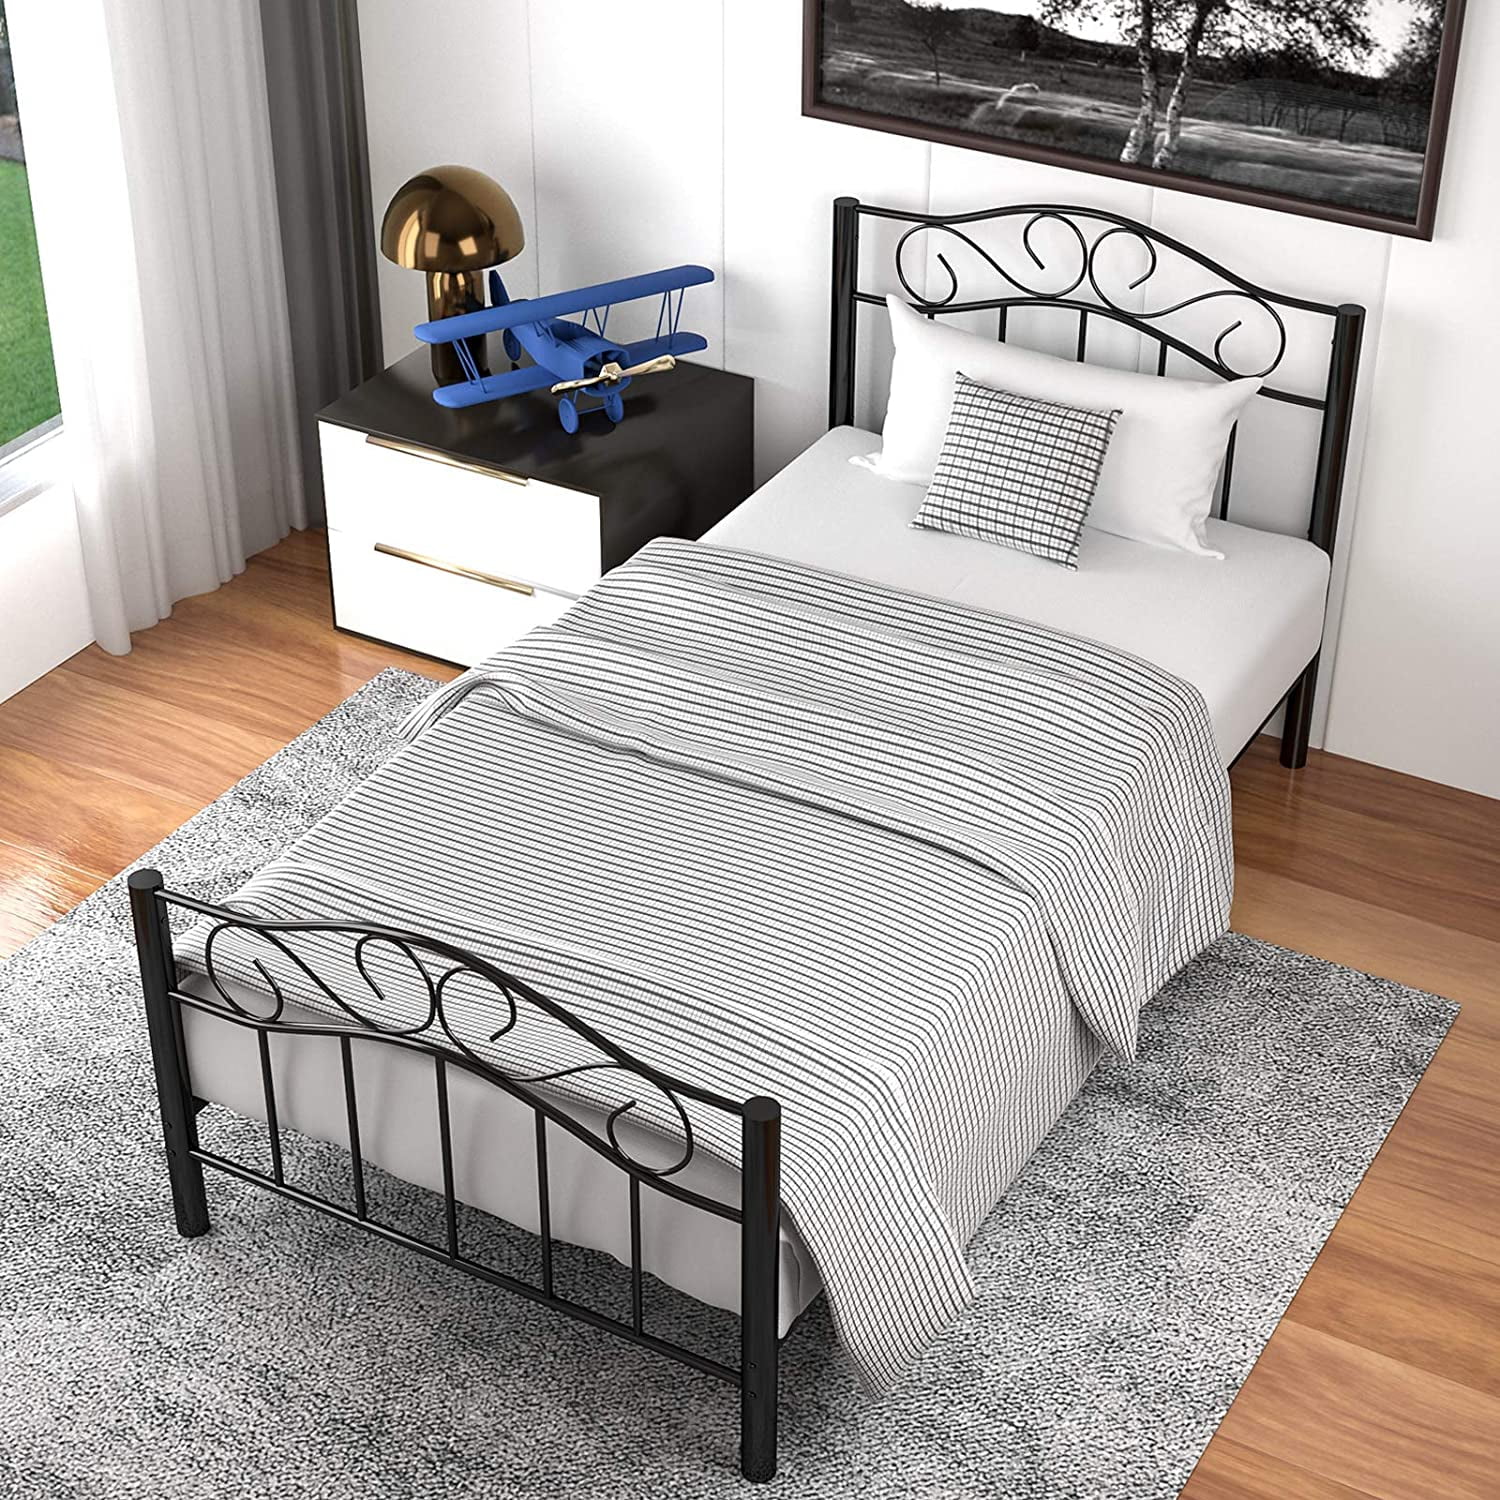 Mecor Twin Xl Curved Metal Bed Frame, Bed Frame Twin Xl Size